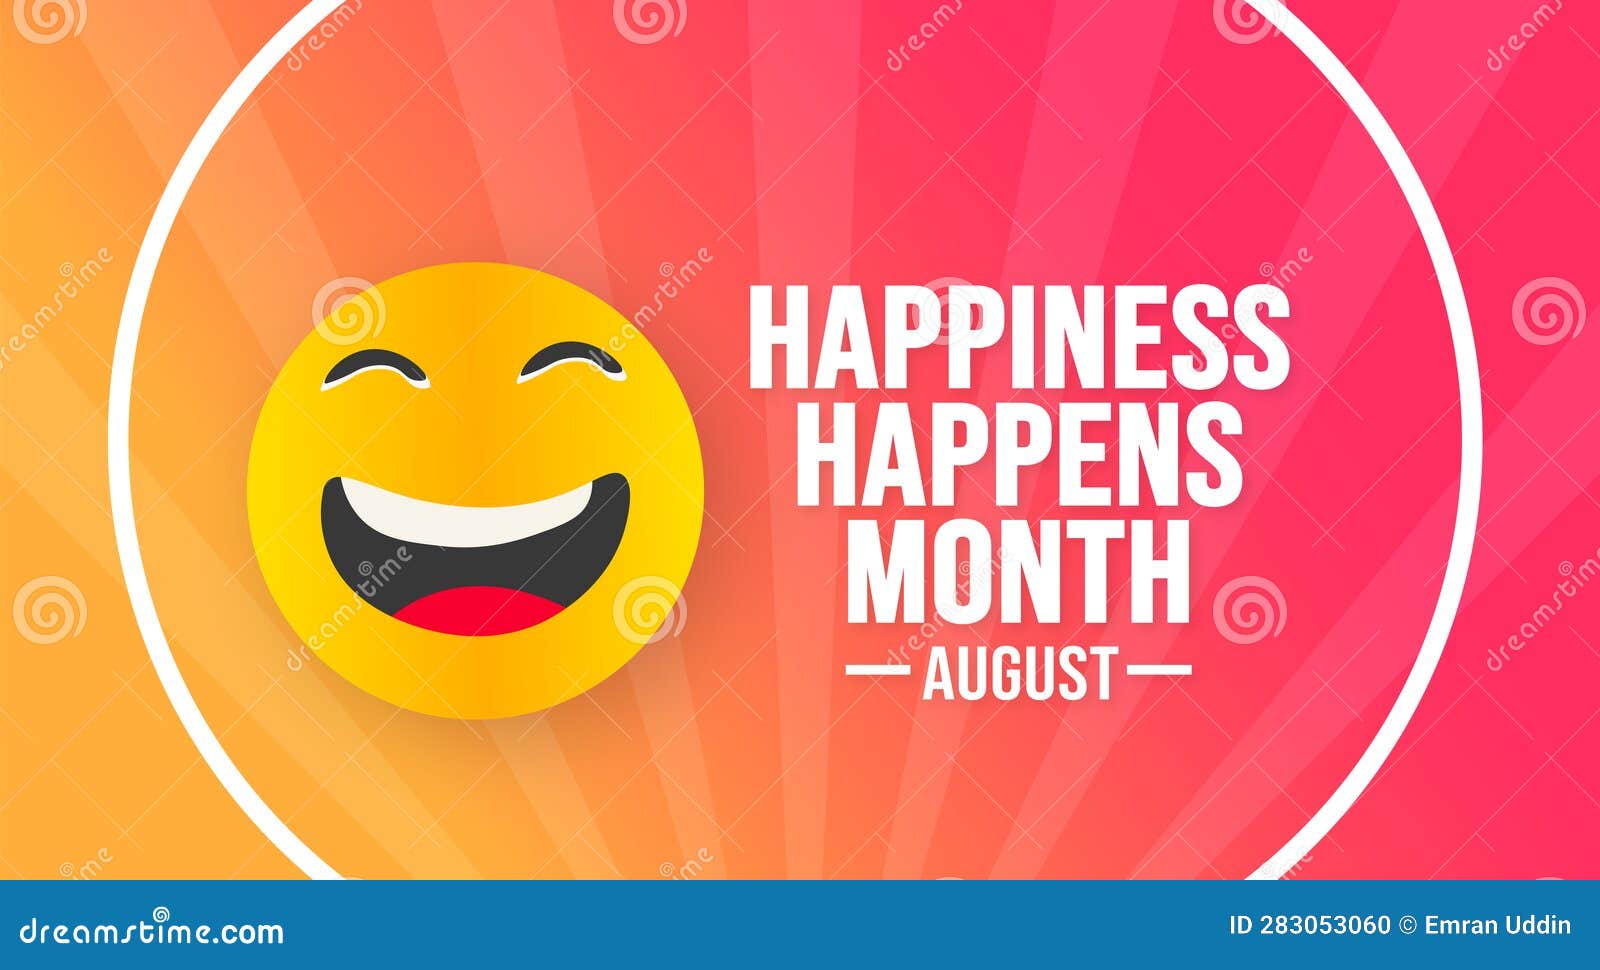 Happiness Happens Month Stock Illustrations 3 Happiness Happens Month